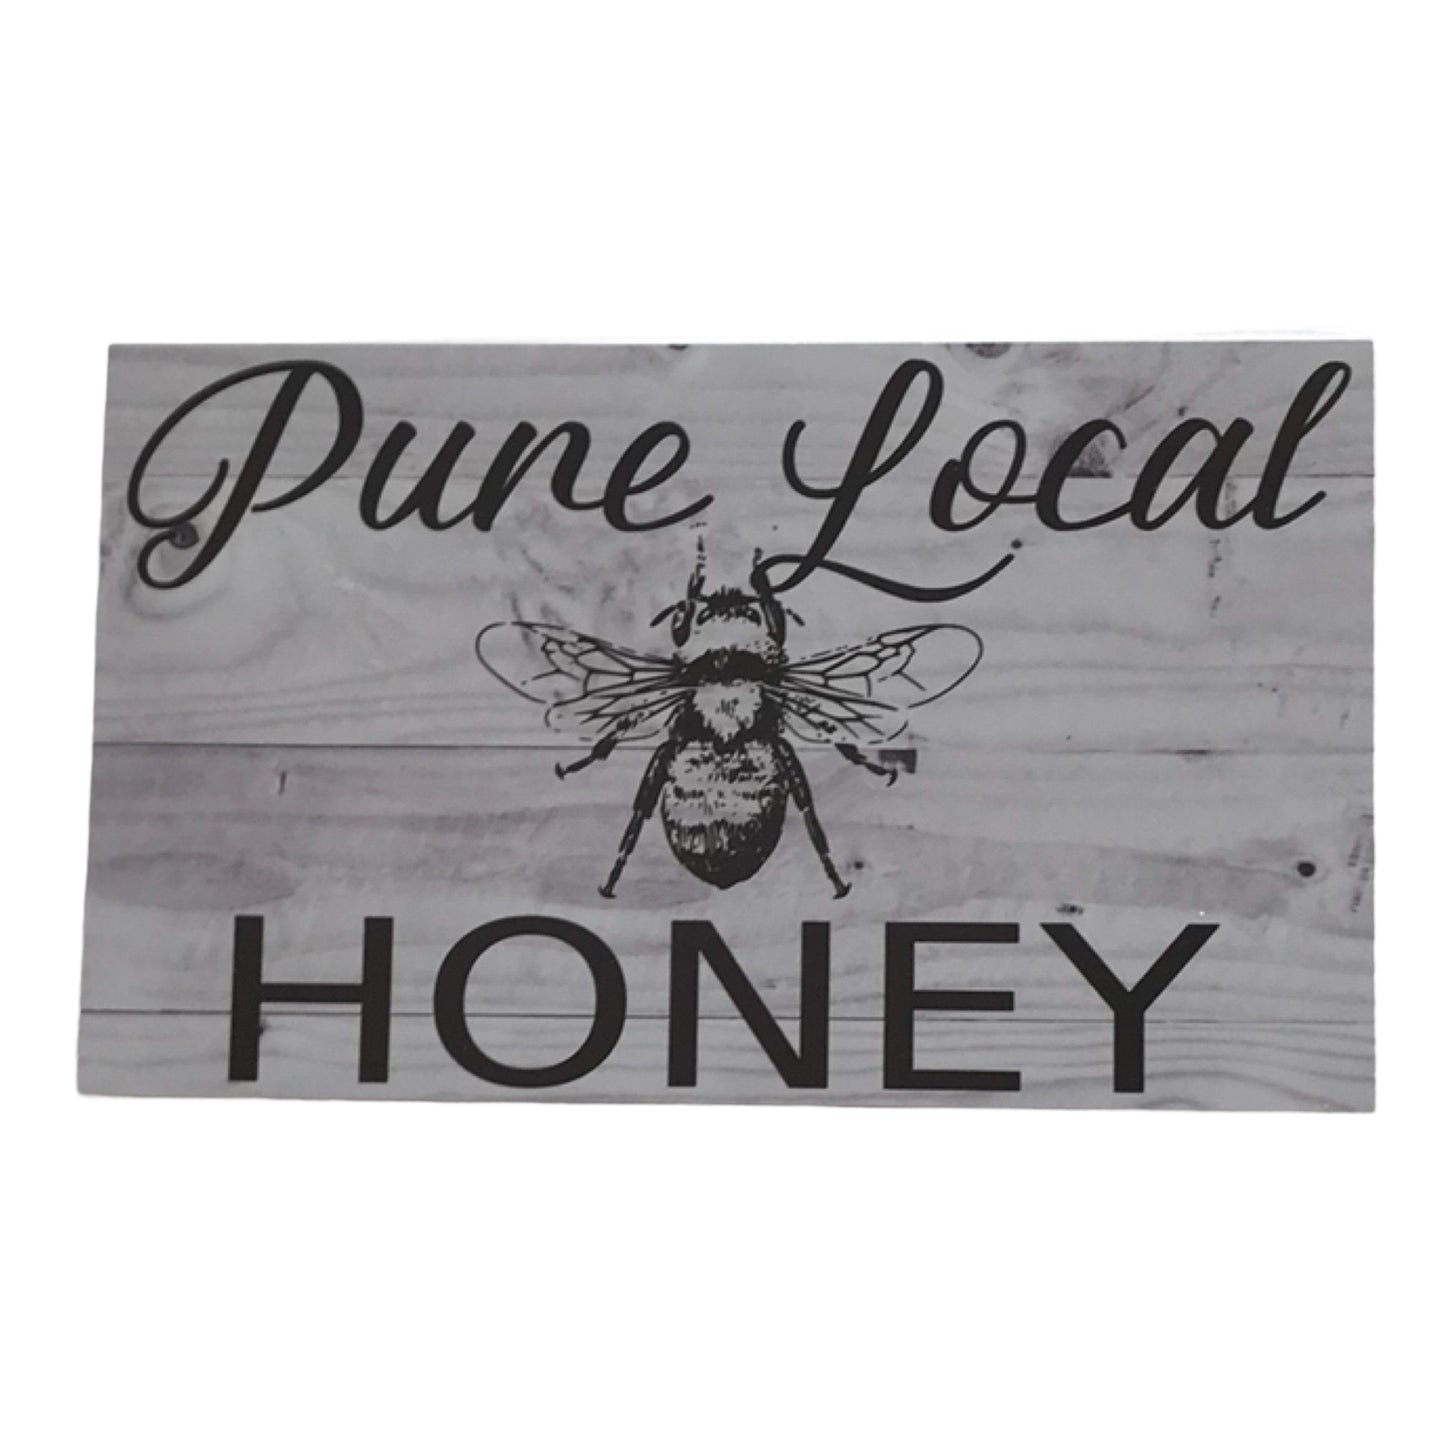 Pure Local Honey Apiary Apiarist Market Sign - The Renmy Store Homewares & Gifts 